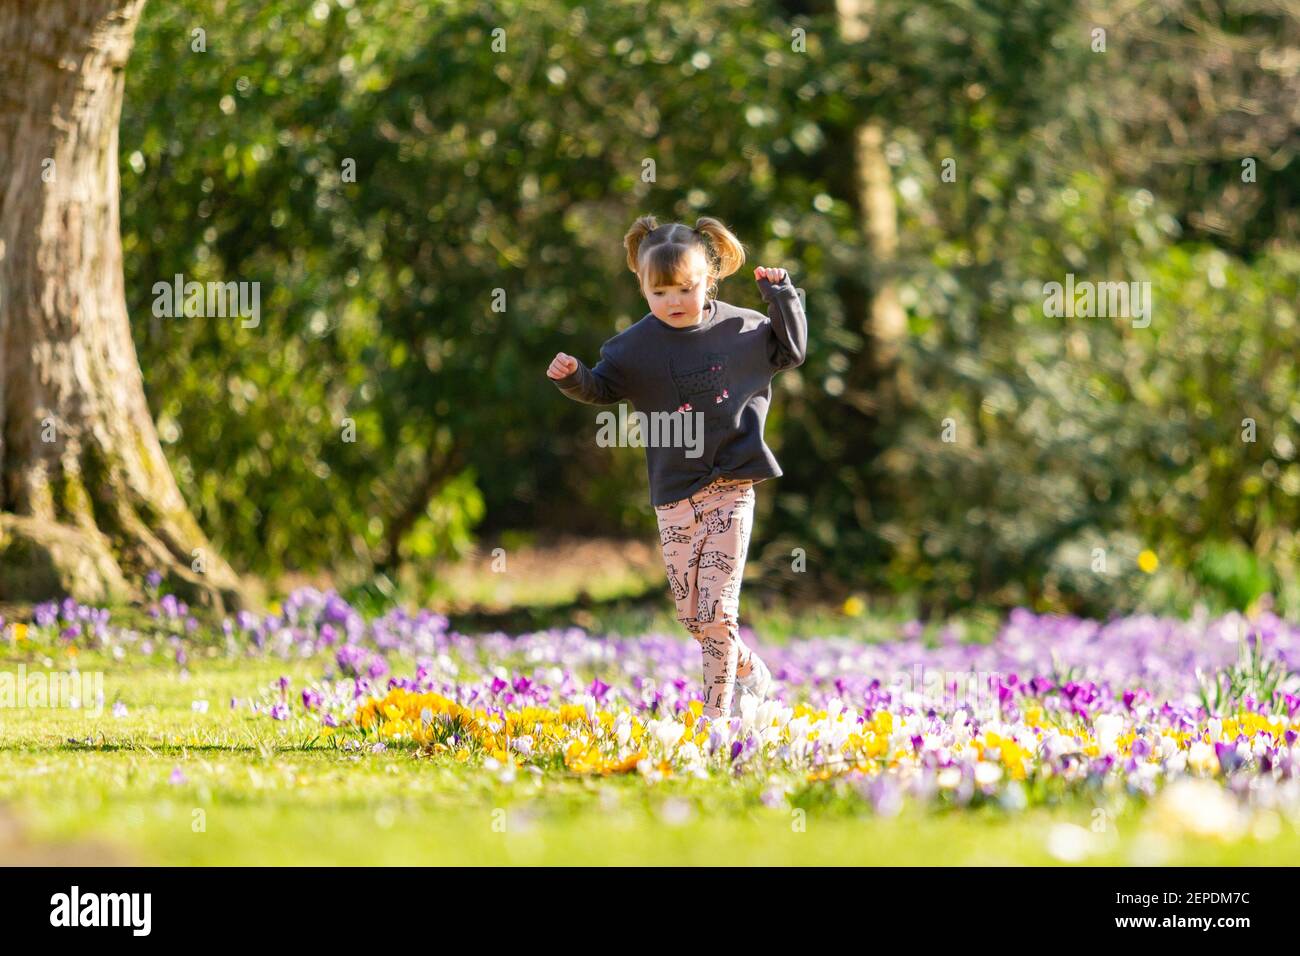 Halesowen, West Midlands, UK. 27th Feb, 2021. UK WEATHER: 4-year-old  Hermione Hadlington enjoys a morning carefully stepping among the spring  flowers in her local park in Halesowen, West Midlands on a weekend